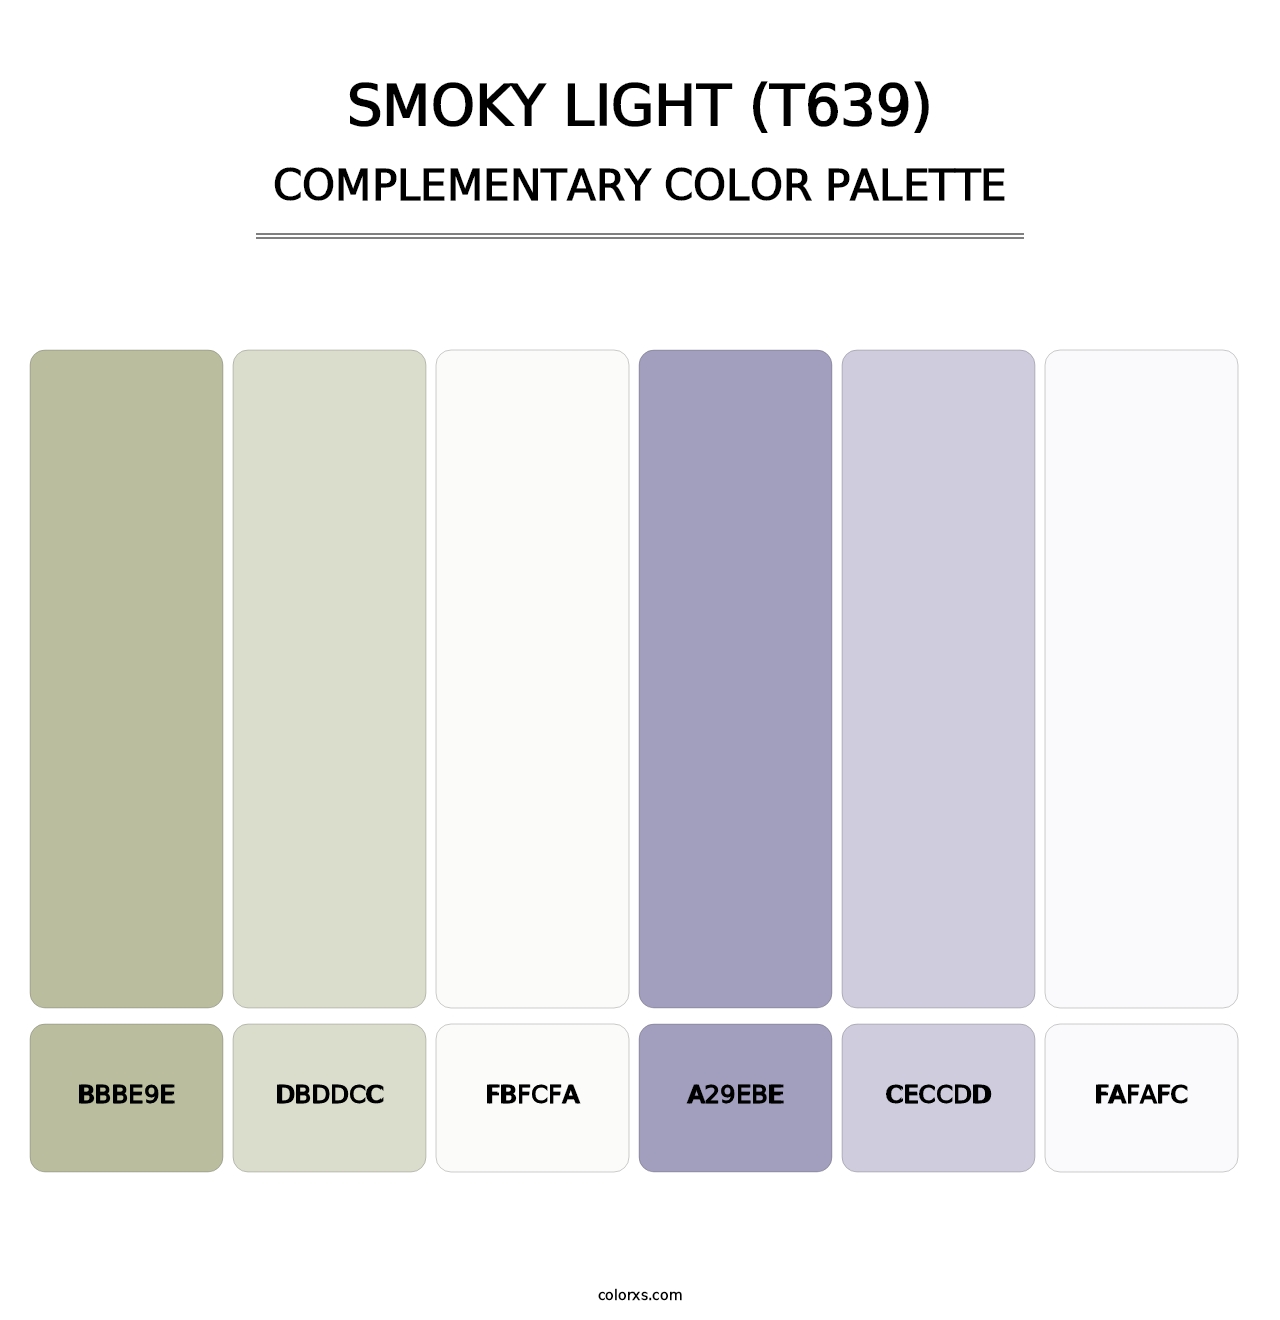 Smoky Light (T639) - Complementary Color Palette